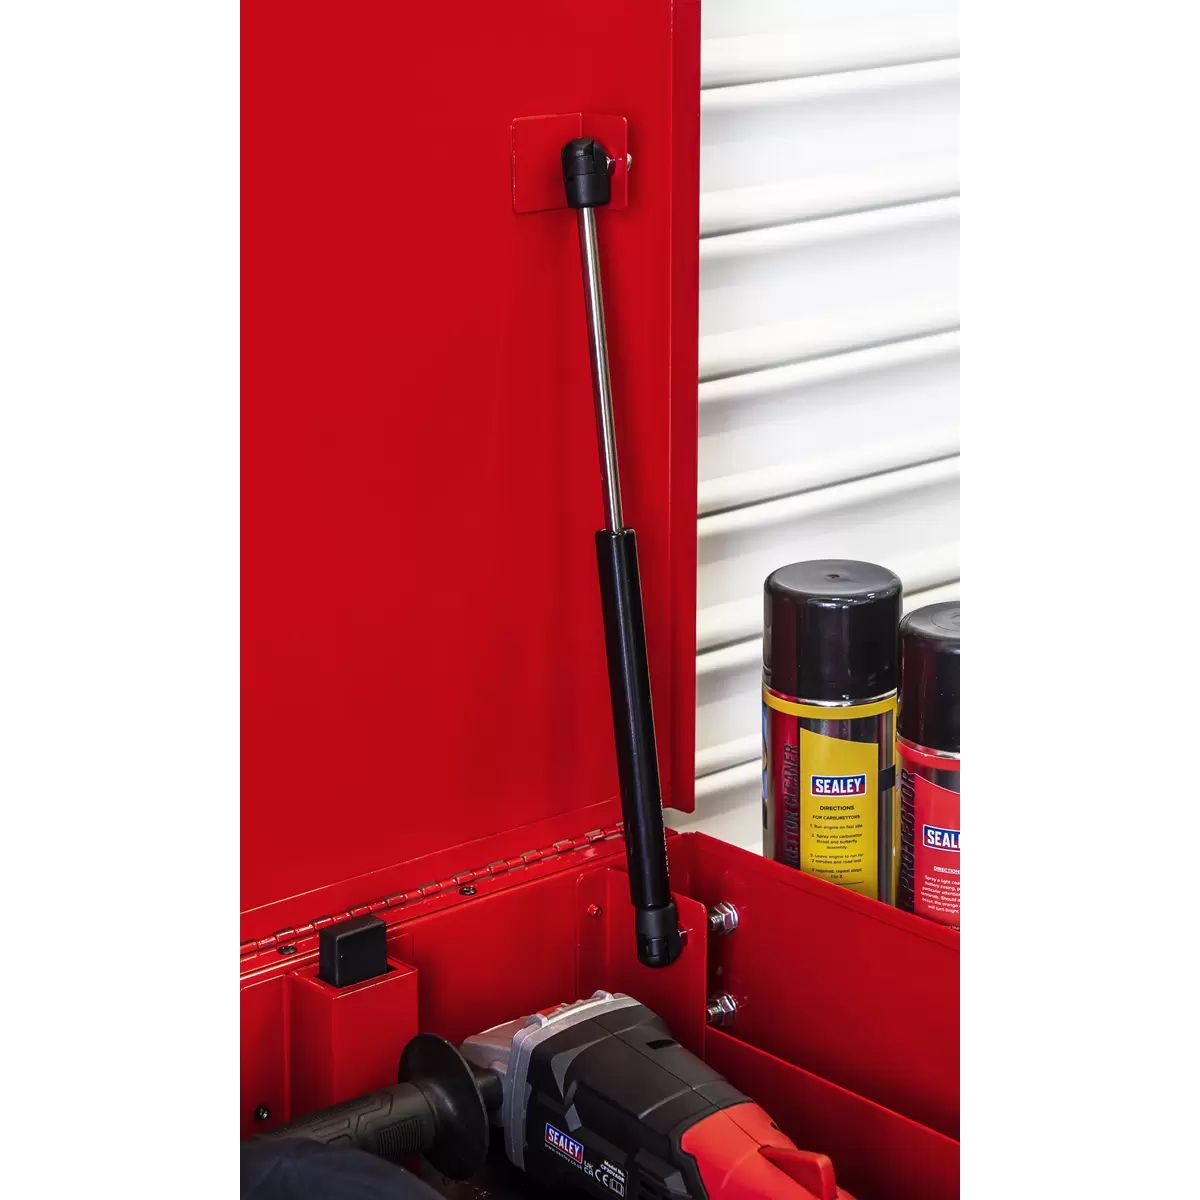 Sealey AP890M Mobile Tool & Parts Trolley with 5 Drawers